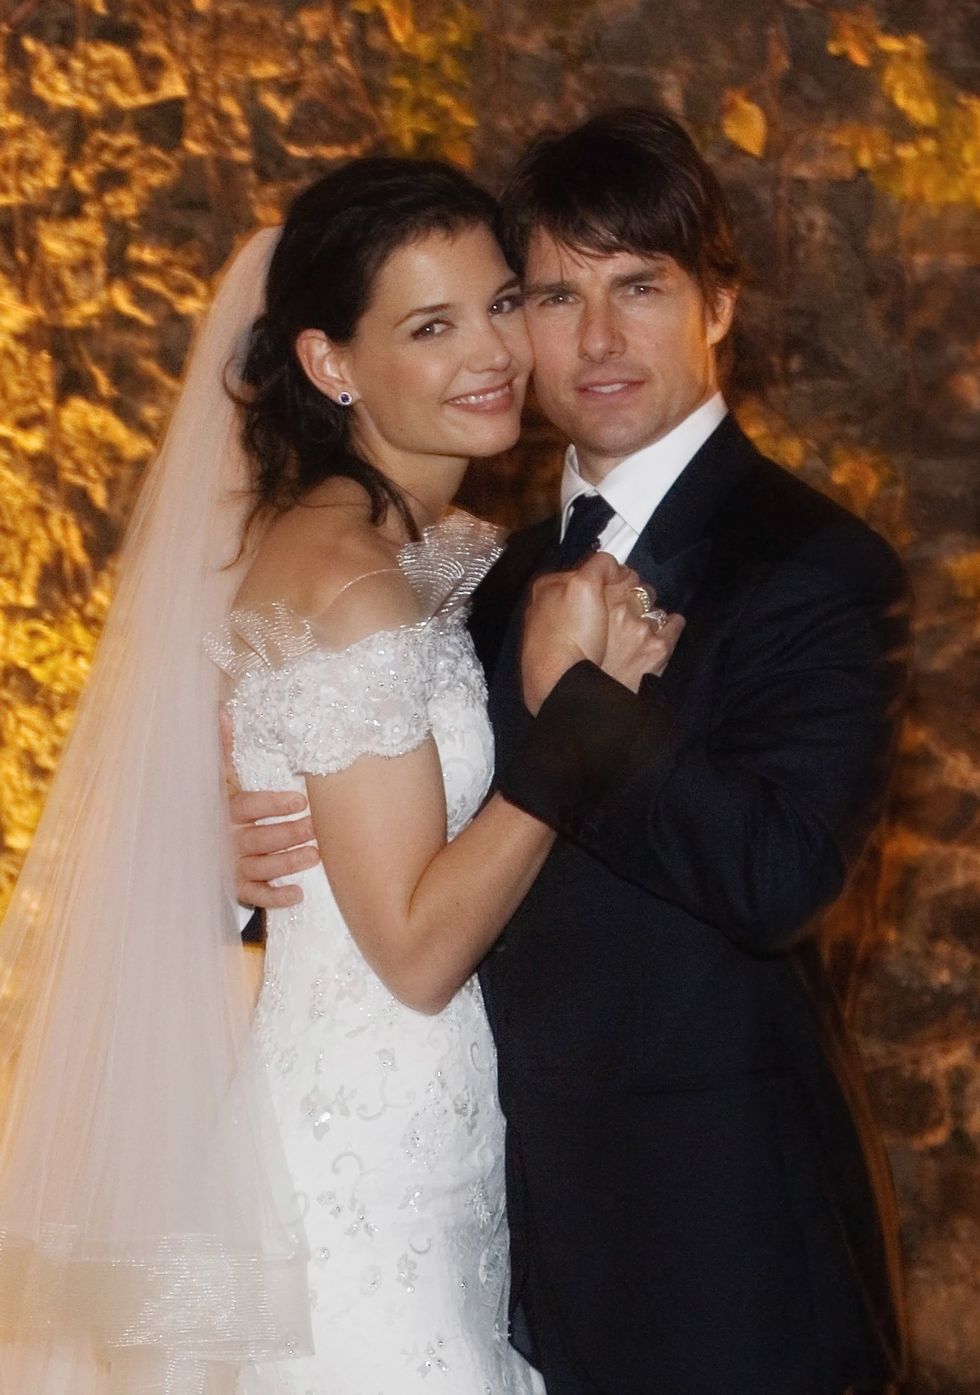 tom cruise and katie holmes wedding day